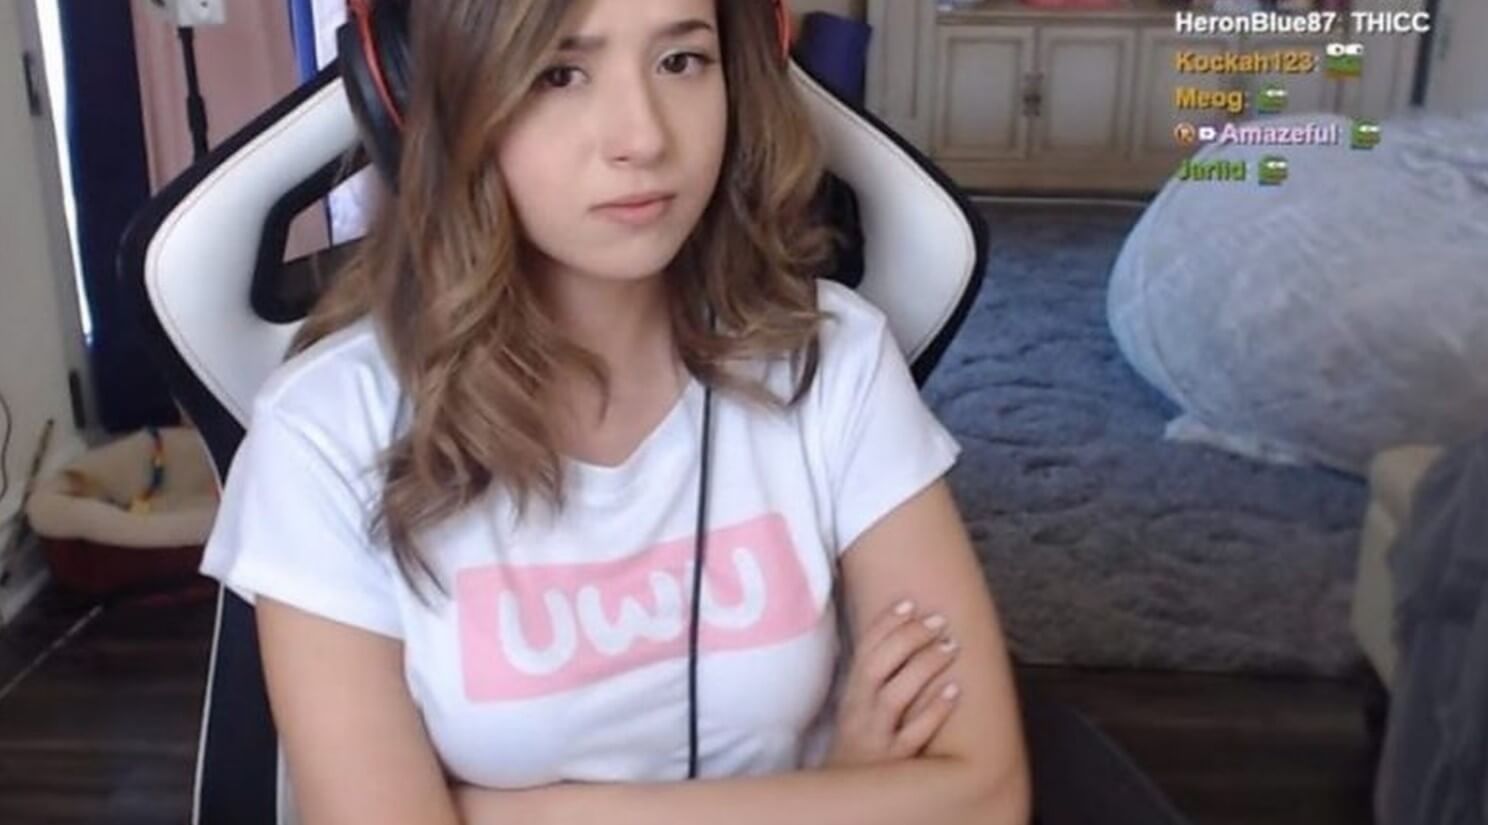 Pokimane has been banned from Twitch